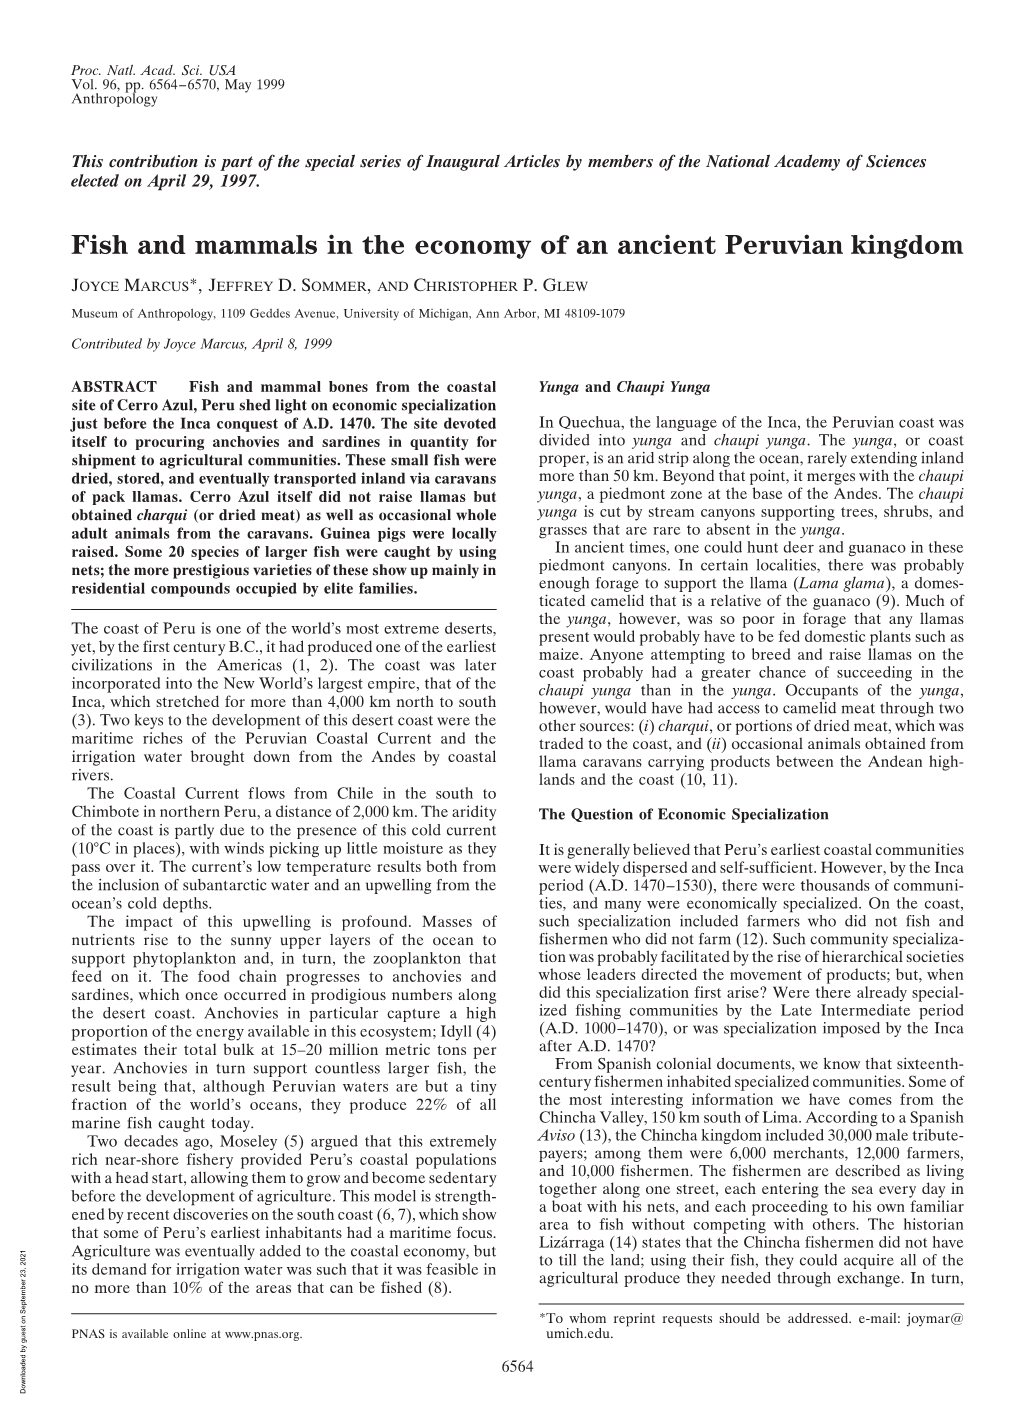 Fish and Mammals in the Economy of an Ancient Peruvian Kingdom